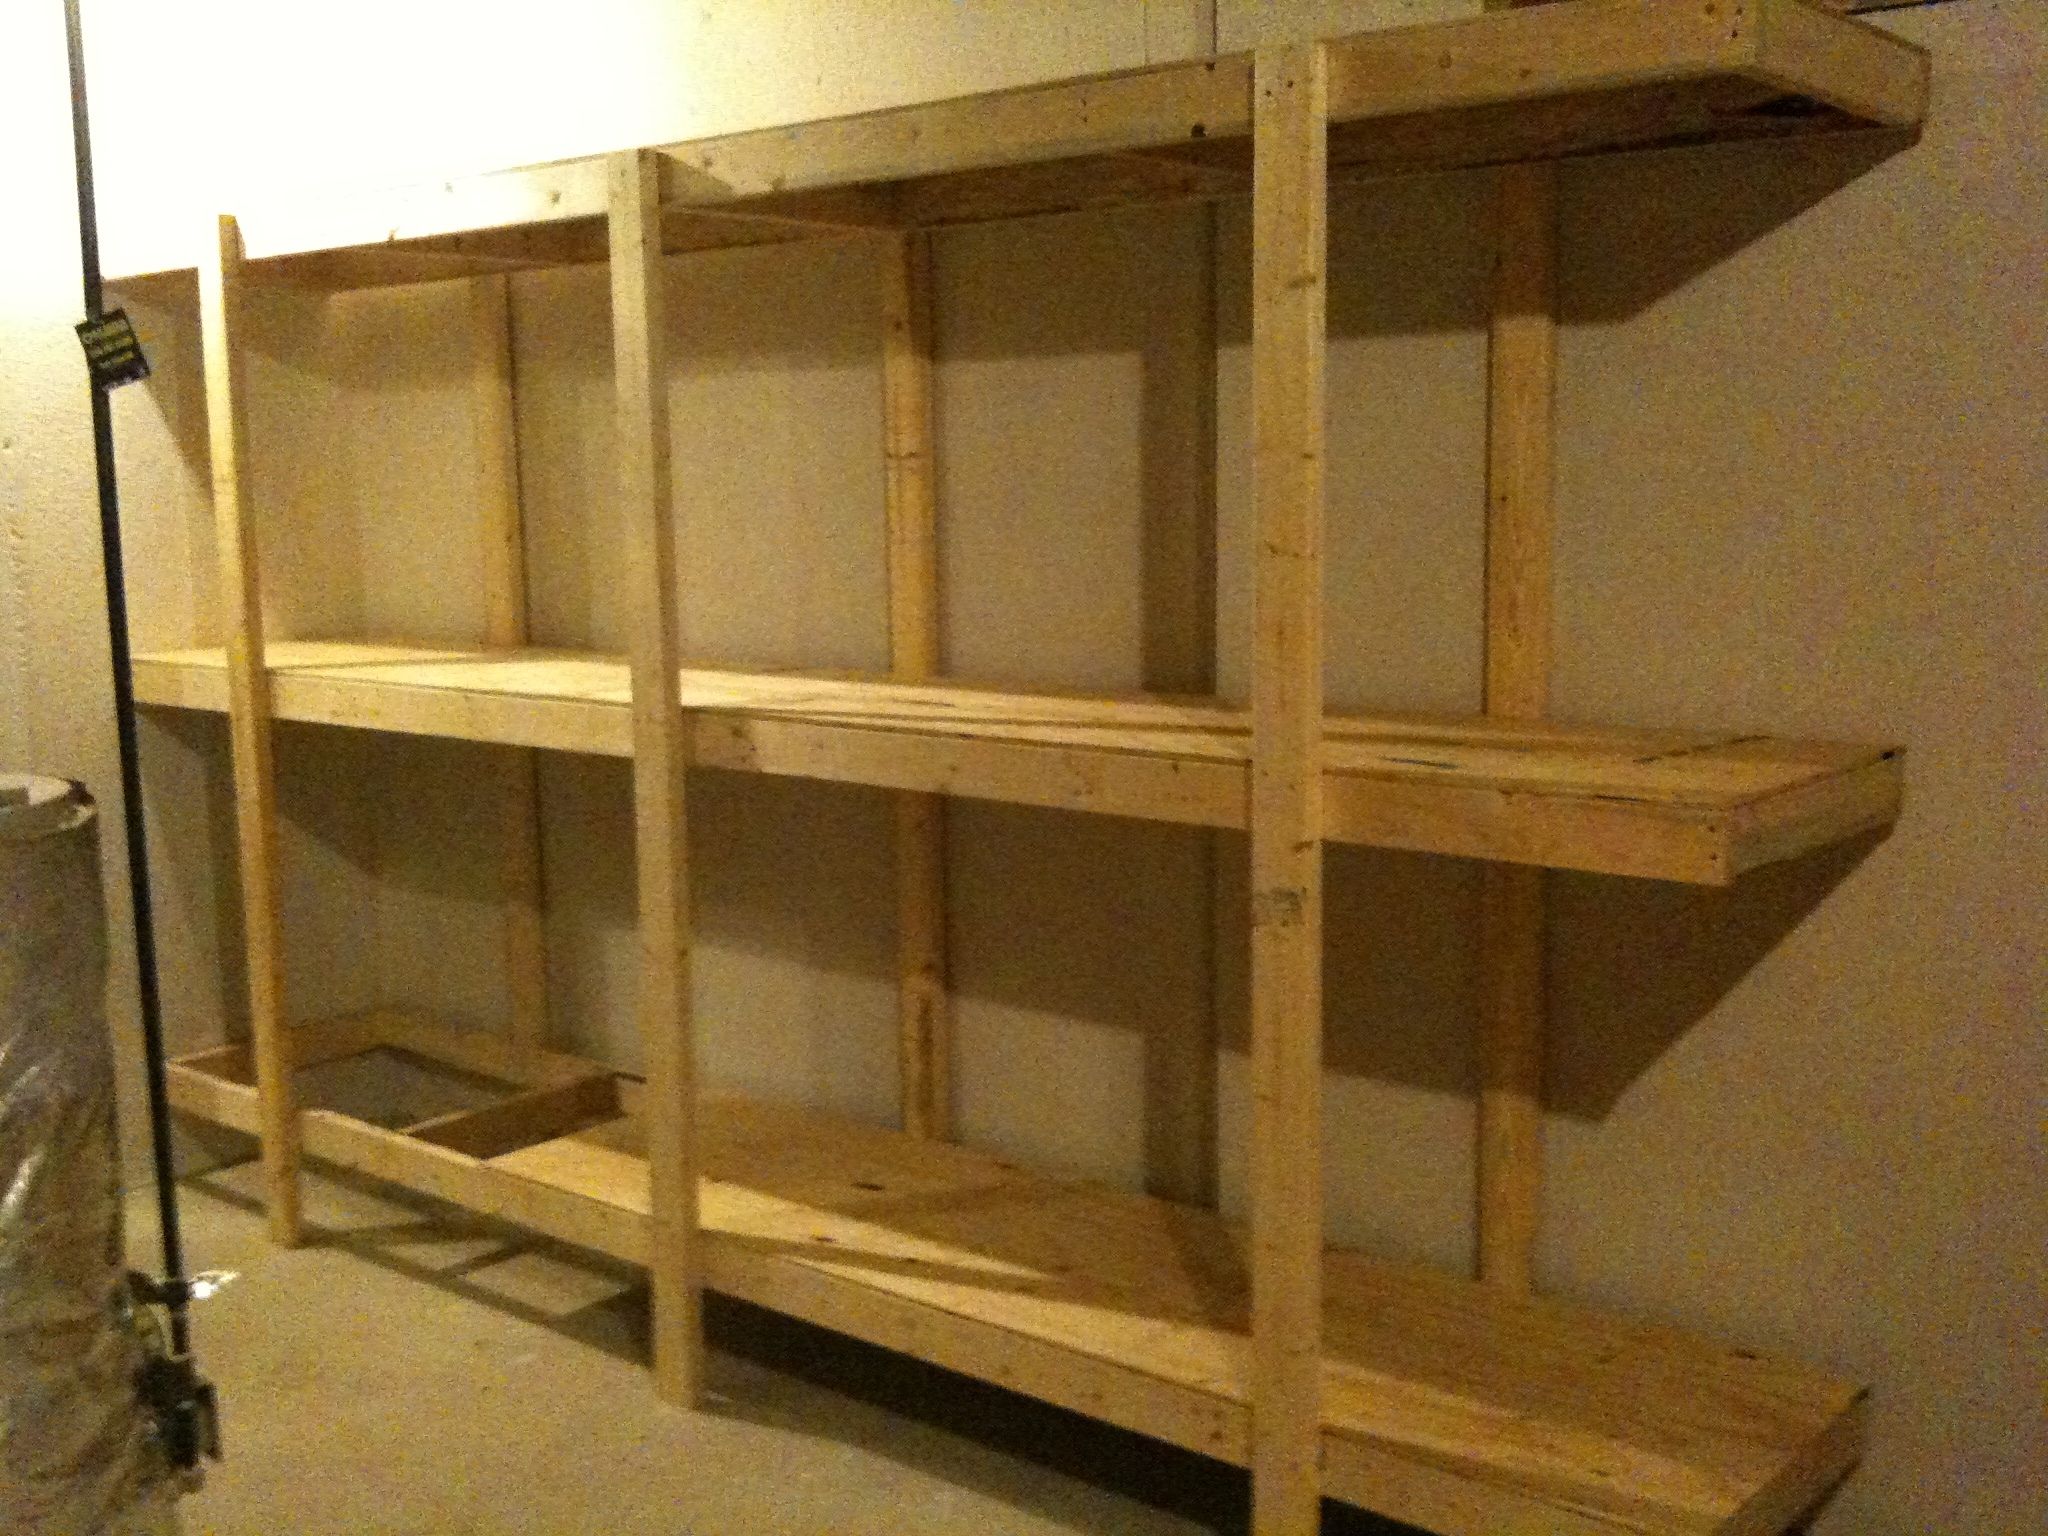 Build Easy Free Standing Shelving Unit For Basement Or Garage 7 Intended For Free Standing Shelving Units Wood (View 2 of 15)